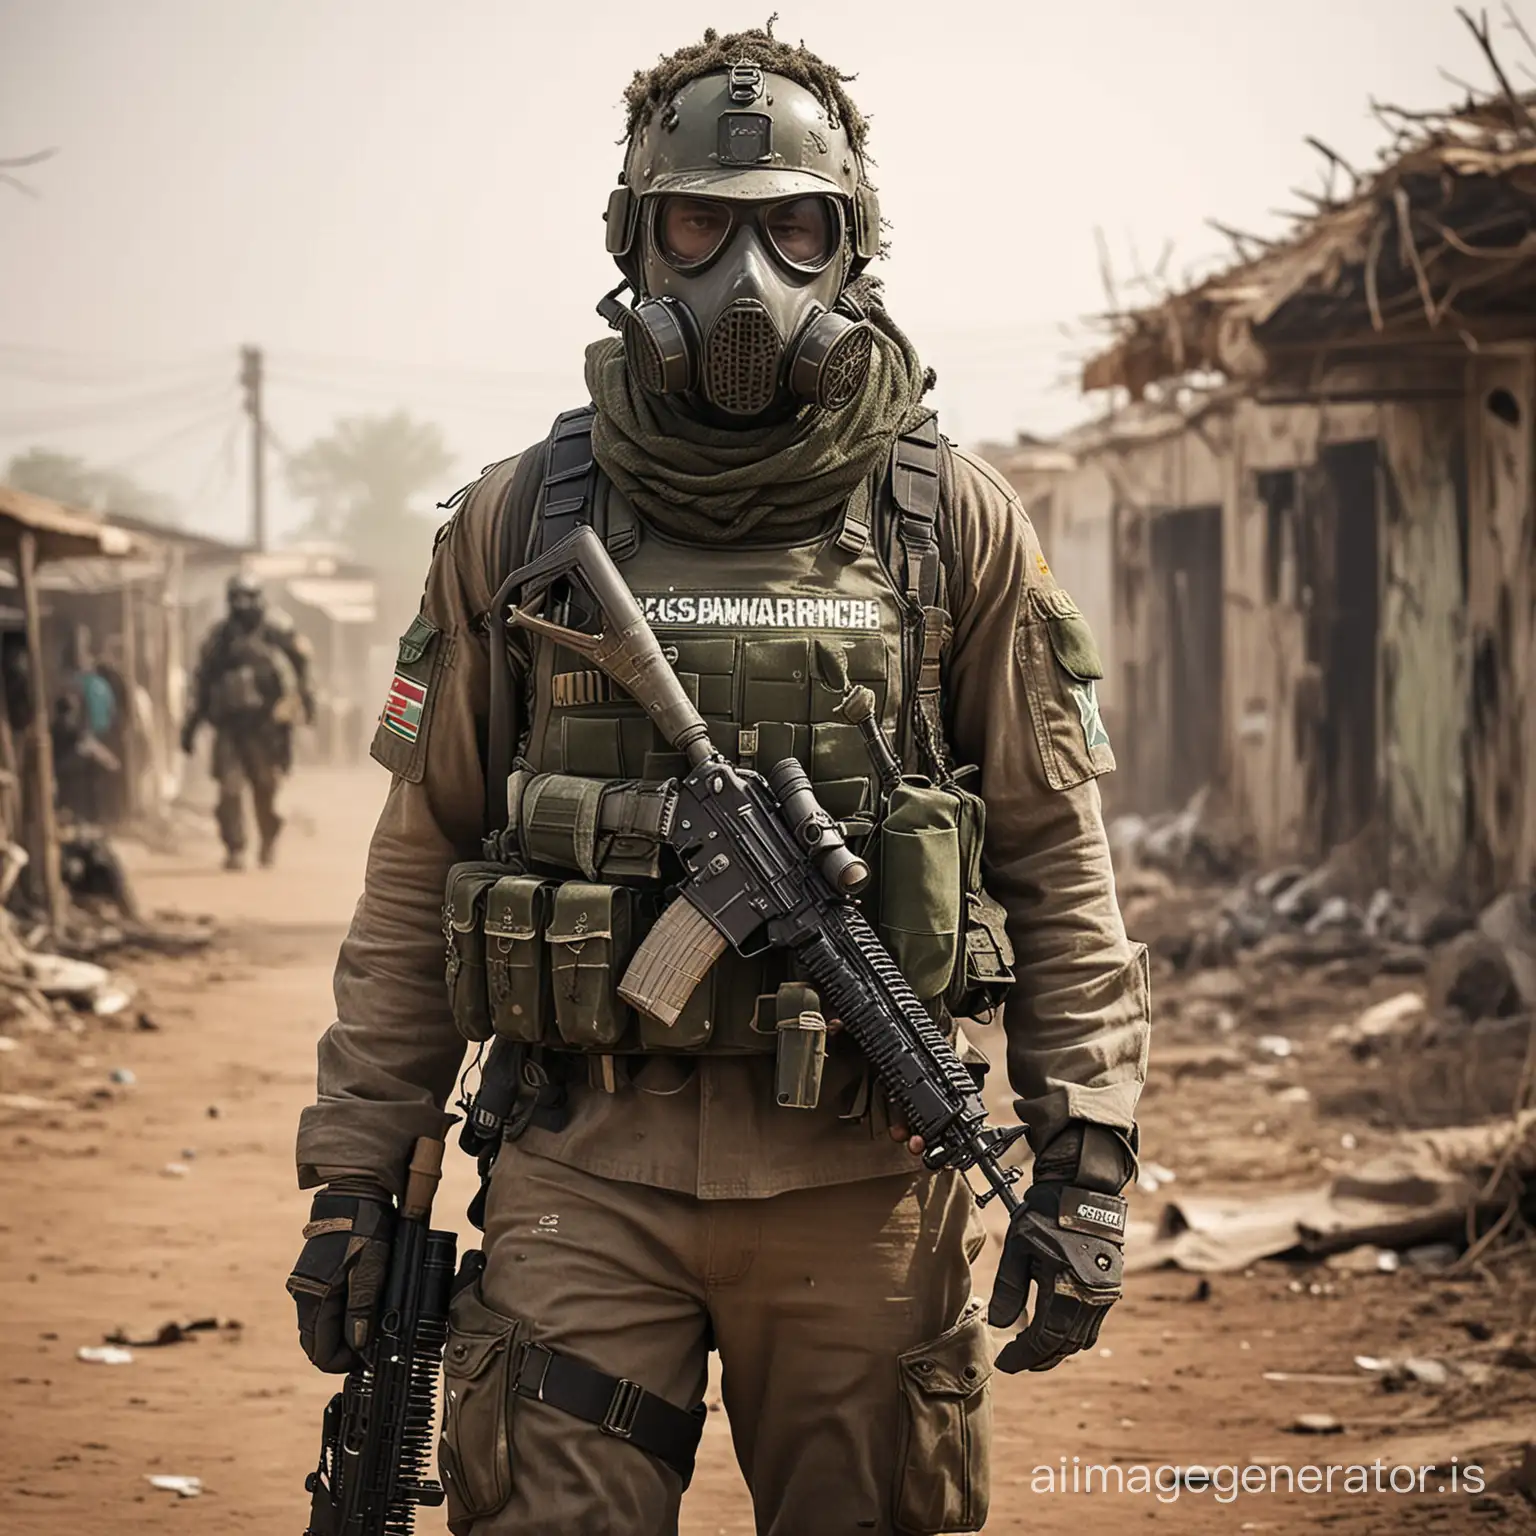 Military operator in a post-apocalyptic setting wearing modern-day body armor in the colors of the Zimbabwean national flag, helmet and a special gas mask and carrying a backpack, with a tattered ghillie suit over his clothes and carrying a rifle. He has the words 'Zimboy' painted on his chest. In a town that has toxic gas